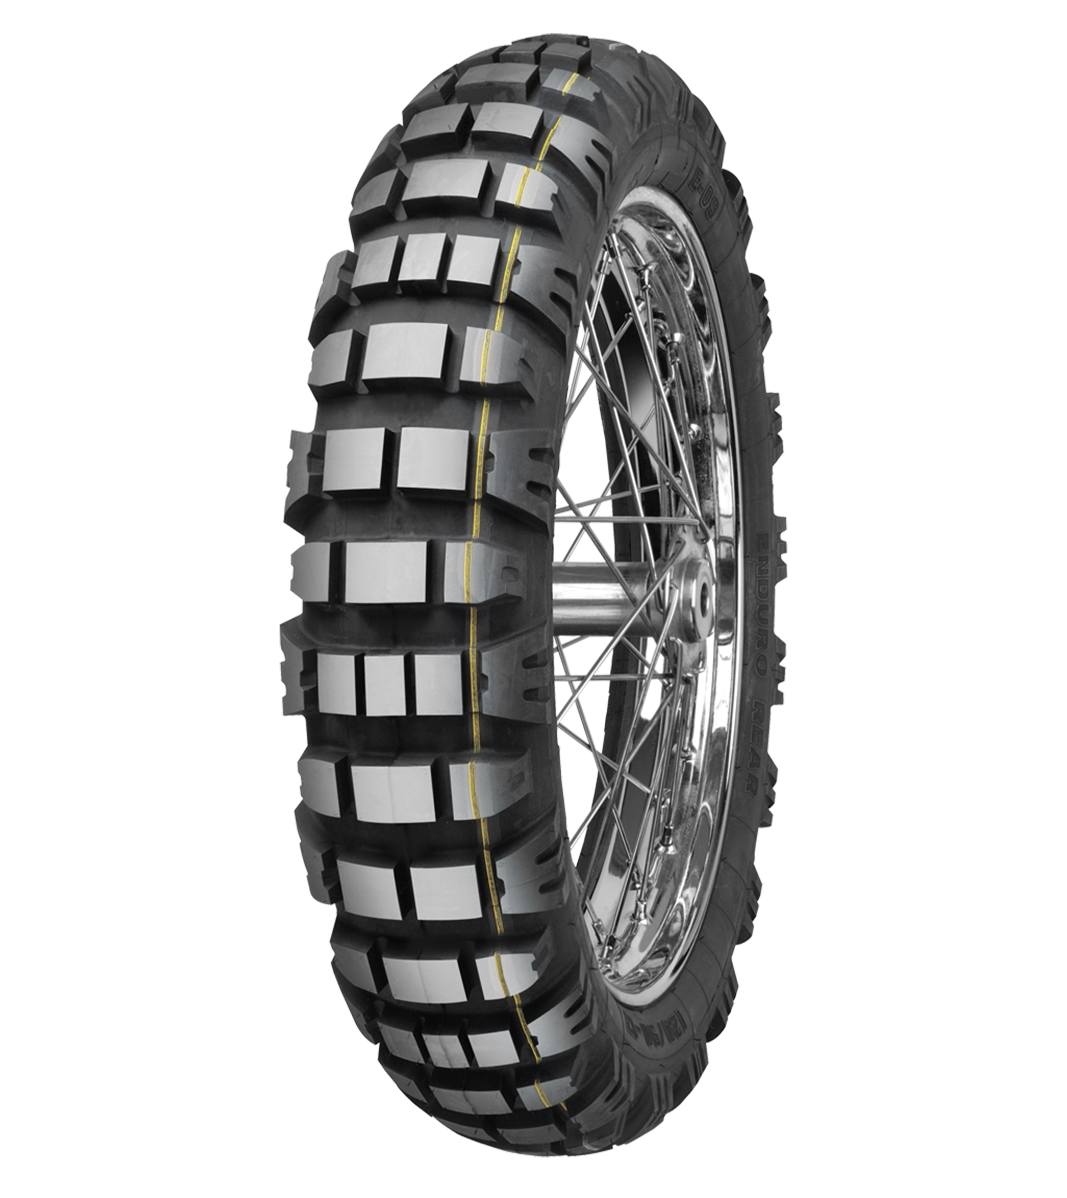 Mitas E-09 ENDURO 140/80-18 Trail OFF Trail DAKAR 70R Yellow Tubeless Rear Tire, 224176, 140/80-18, Adventure Touring, E Series, E-09 Enduro, Rear, Trail, Trail OFF, Tires - Imported and distributed in North & South America by Lindeco Genuine Powersports - Premier Powersports Equipment and Accessories for Motorcycle Enthusiasts, Professional Riders and Dealers.